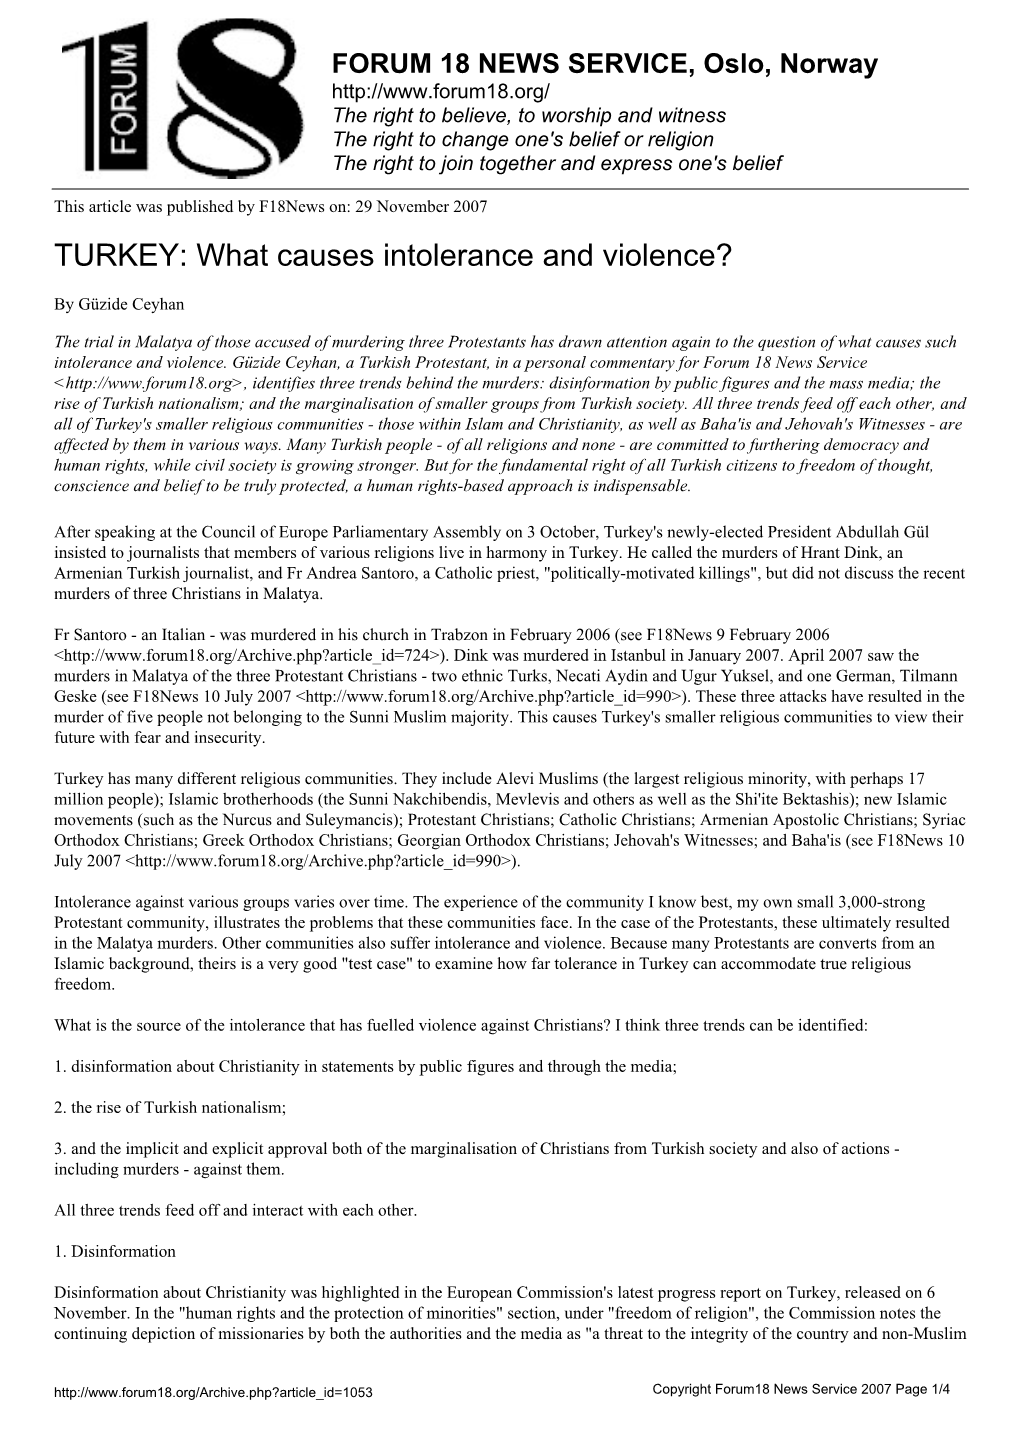 TURKEY: What Causes Intolerance and Violence?